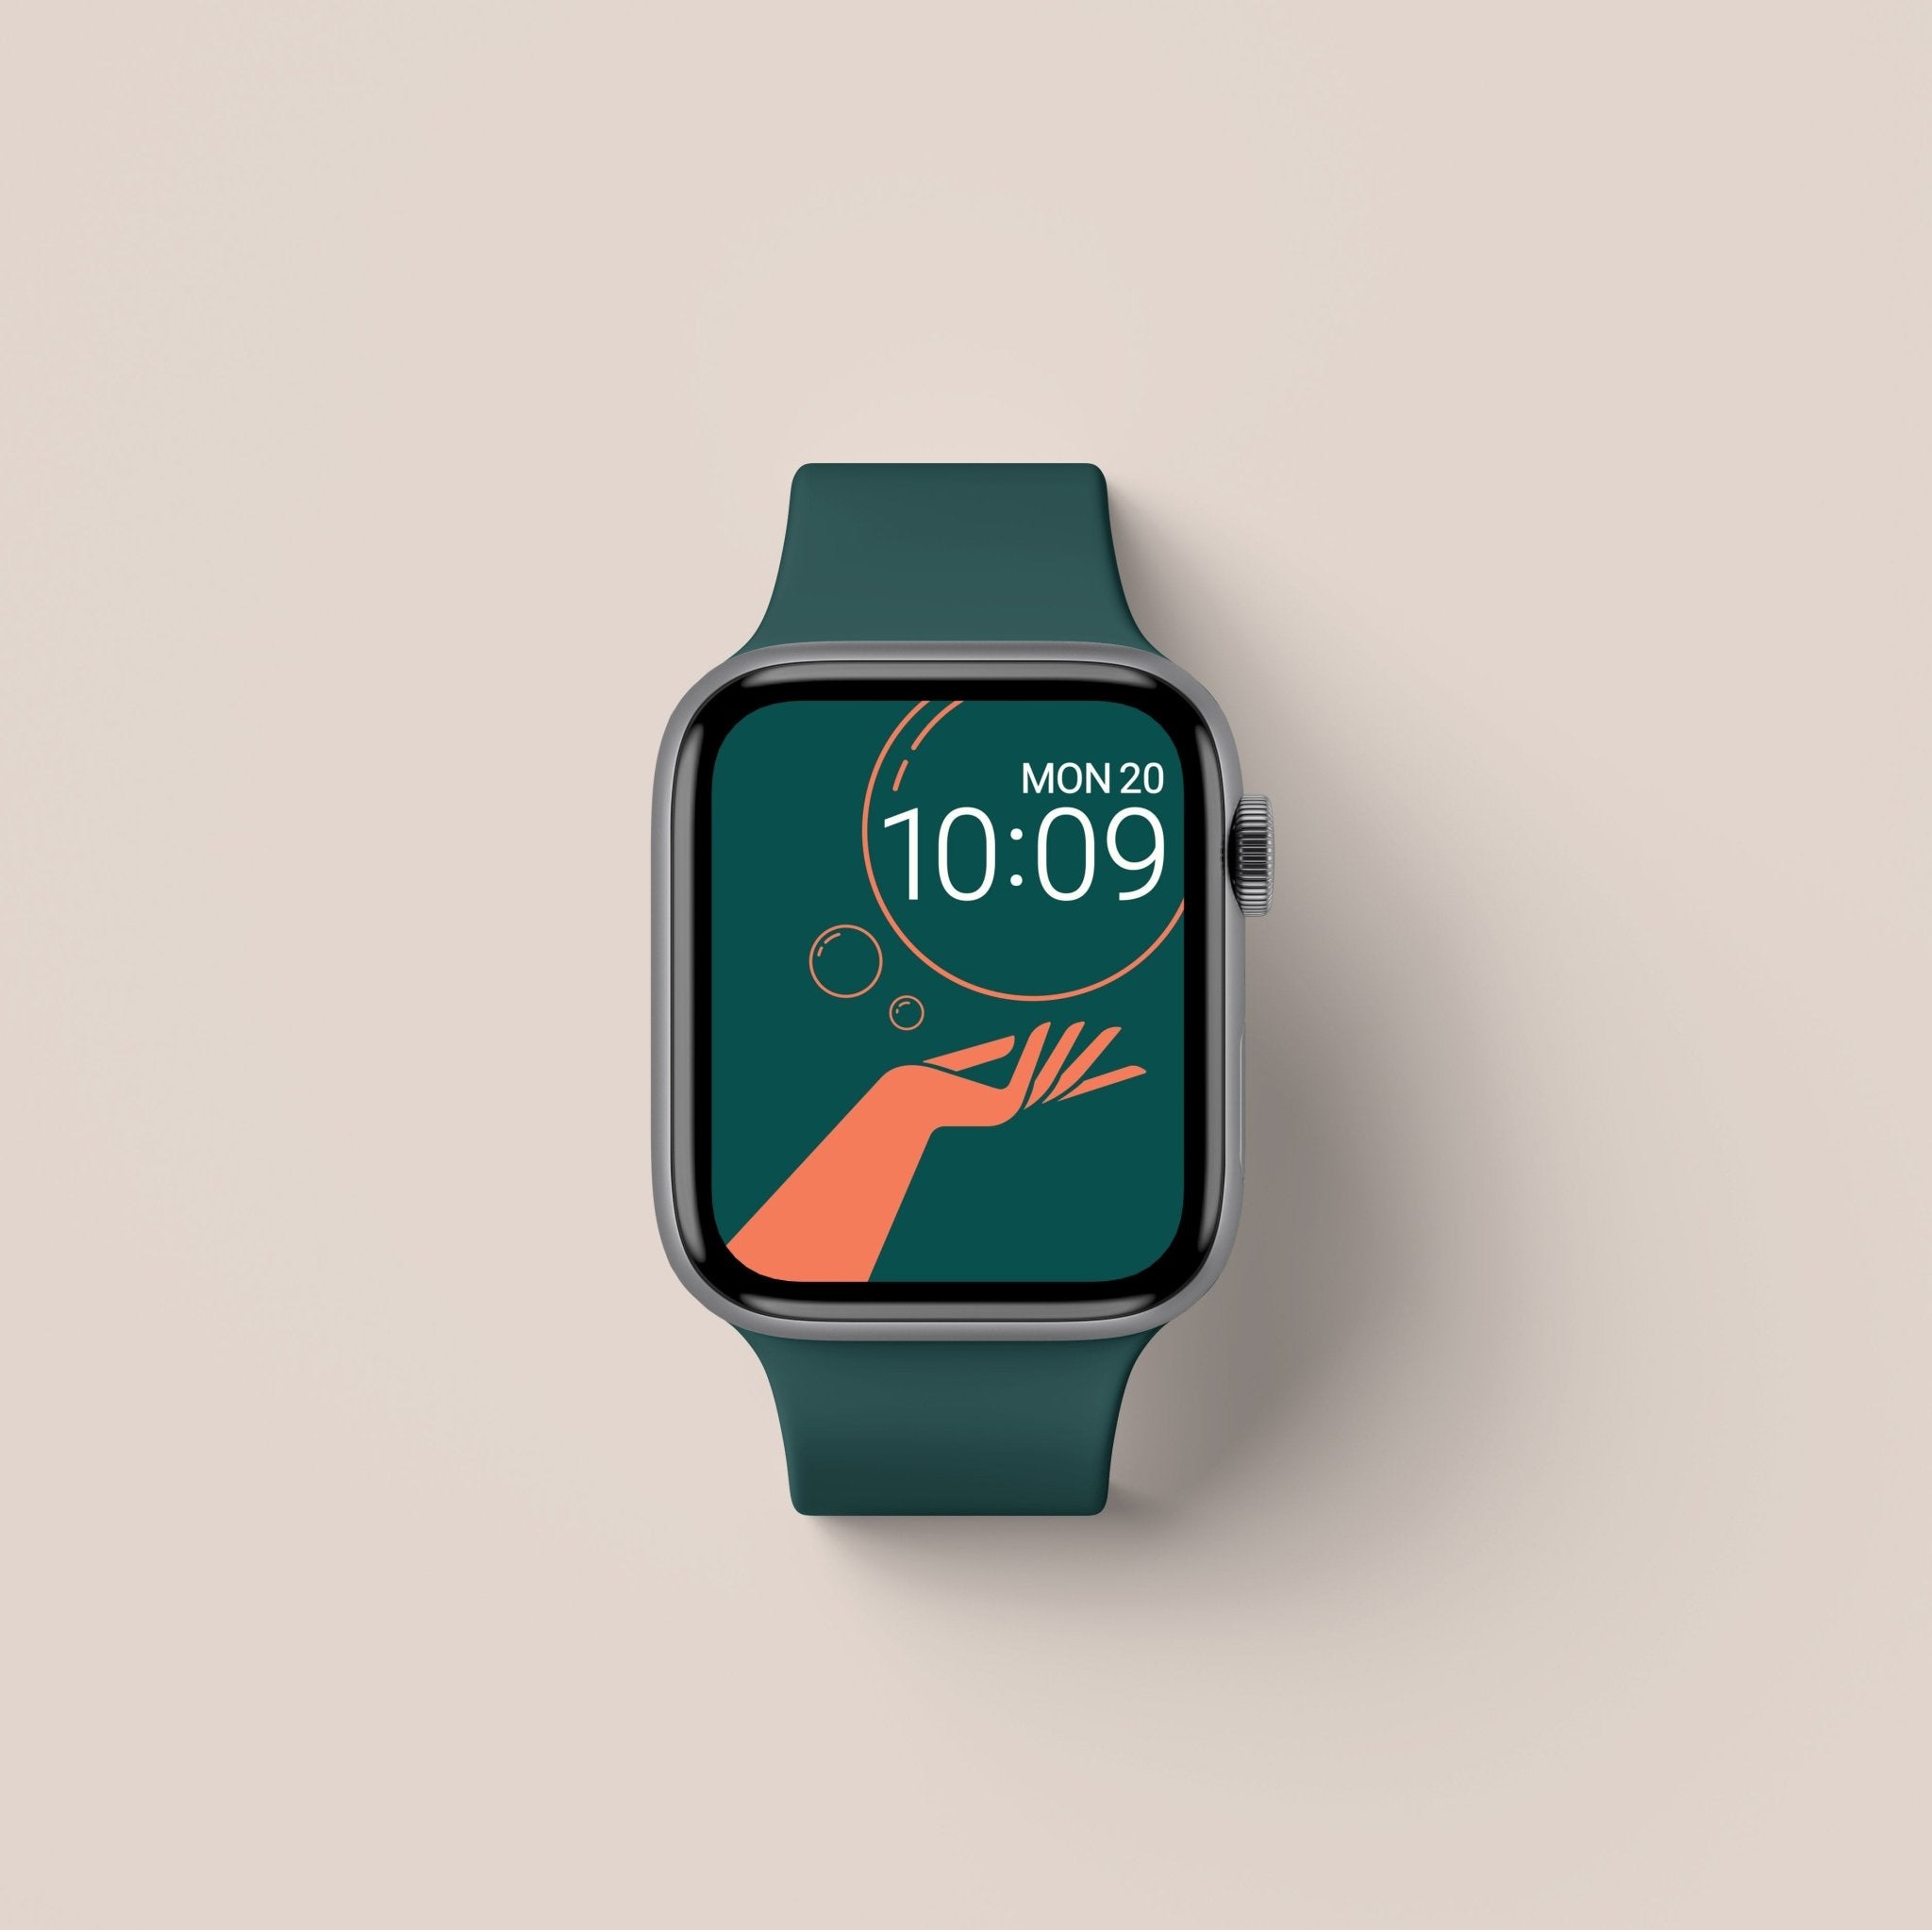 MG&T | Apple Watch Wallpapers - 4 Pack - Buckle & Band - MG&T